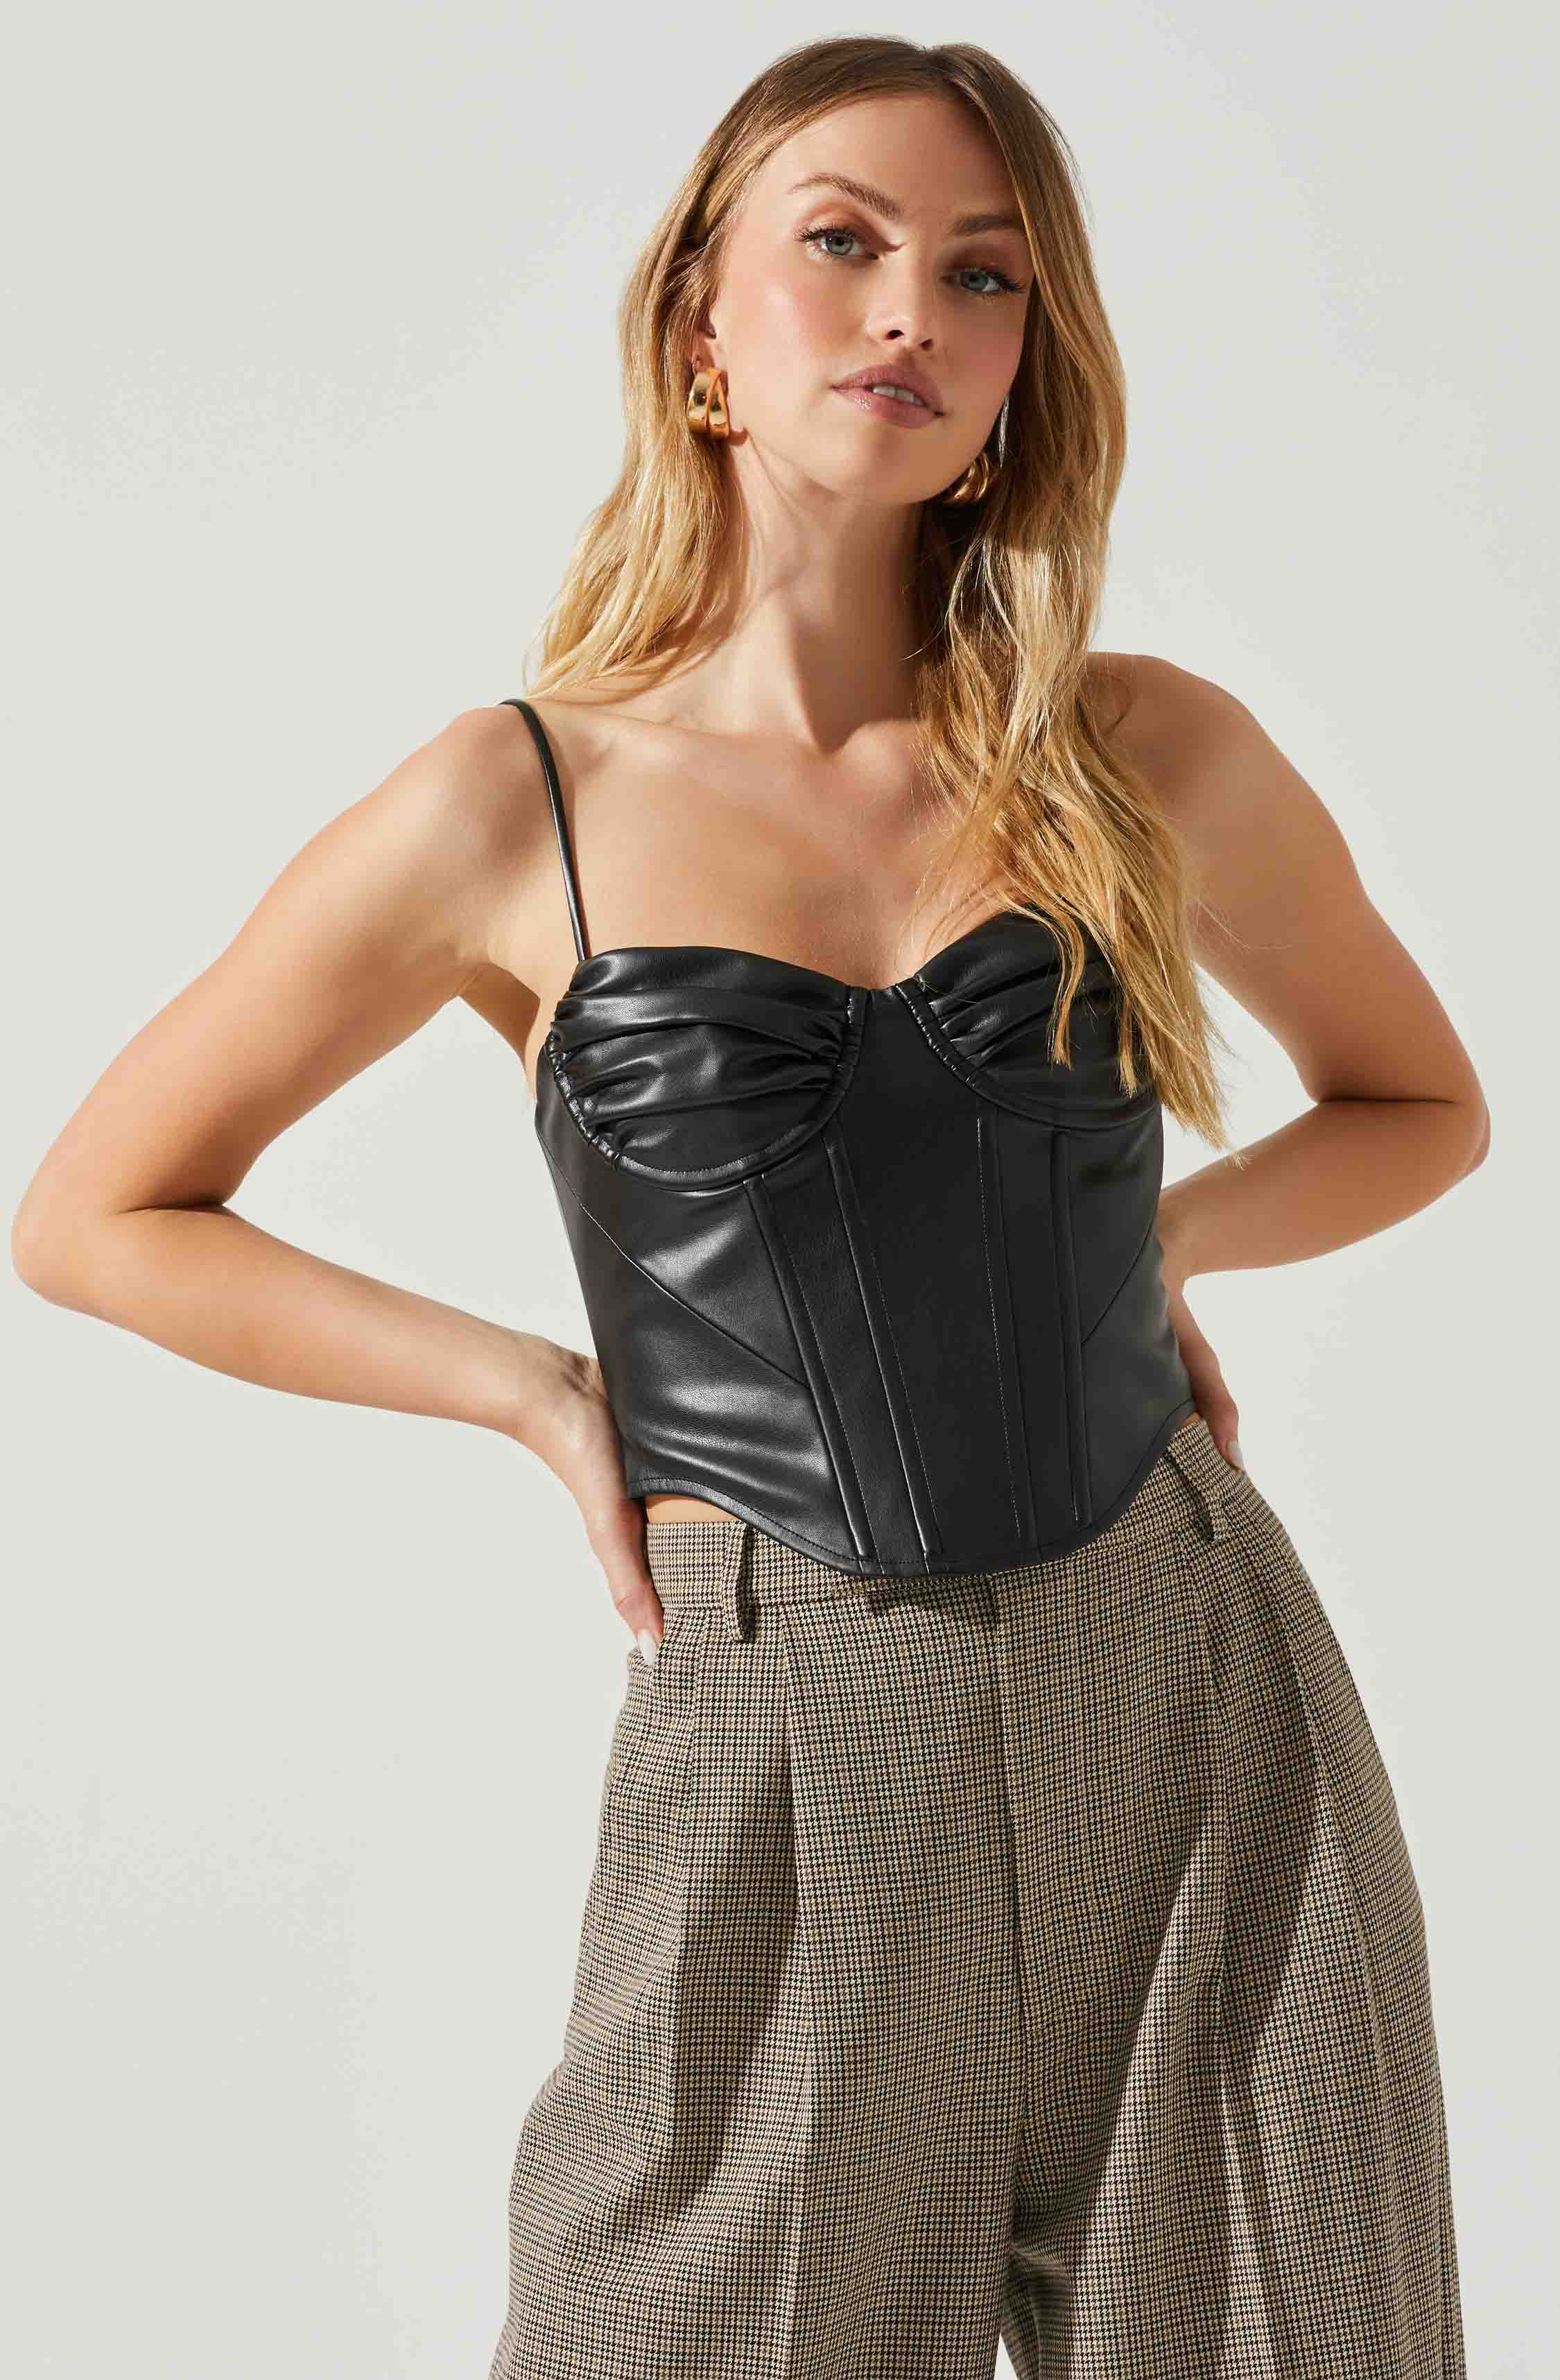 Alice + Olivia - Pearle Vegan Leather Bustier Top - Toffee